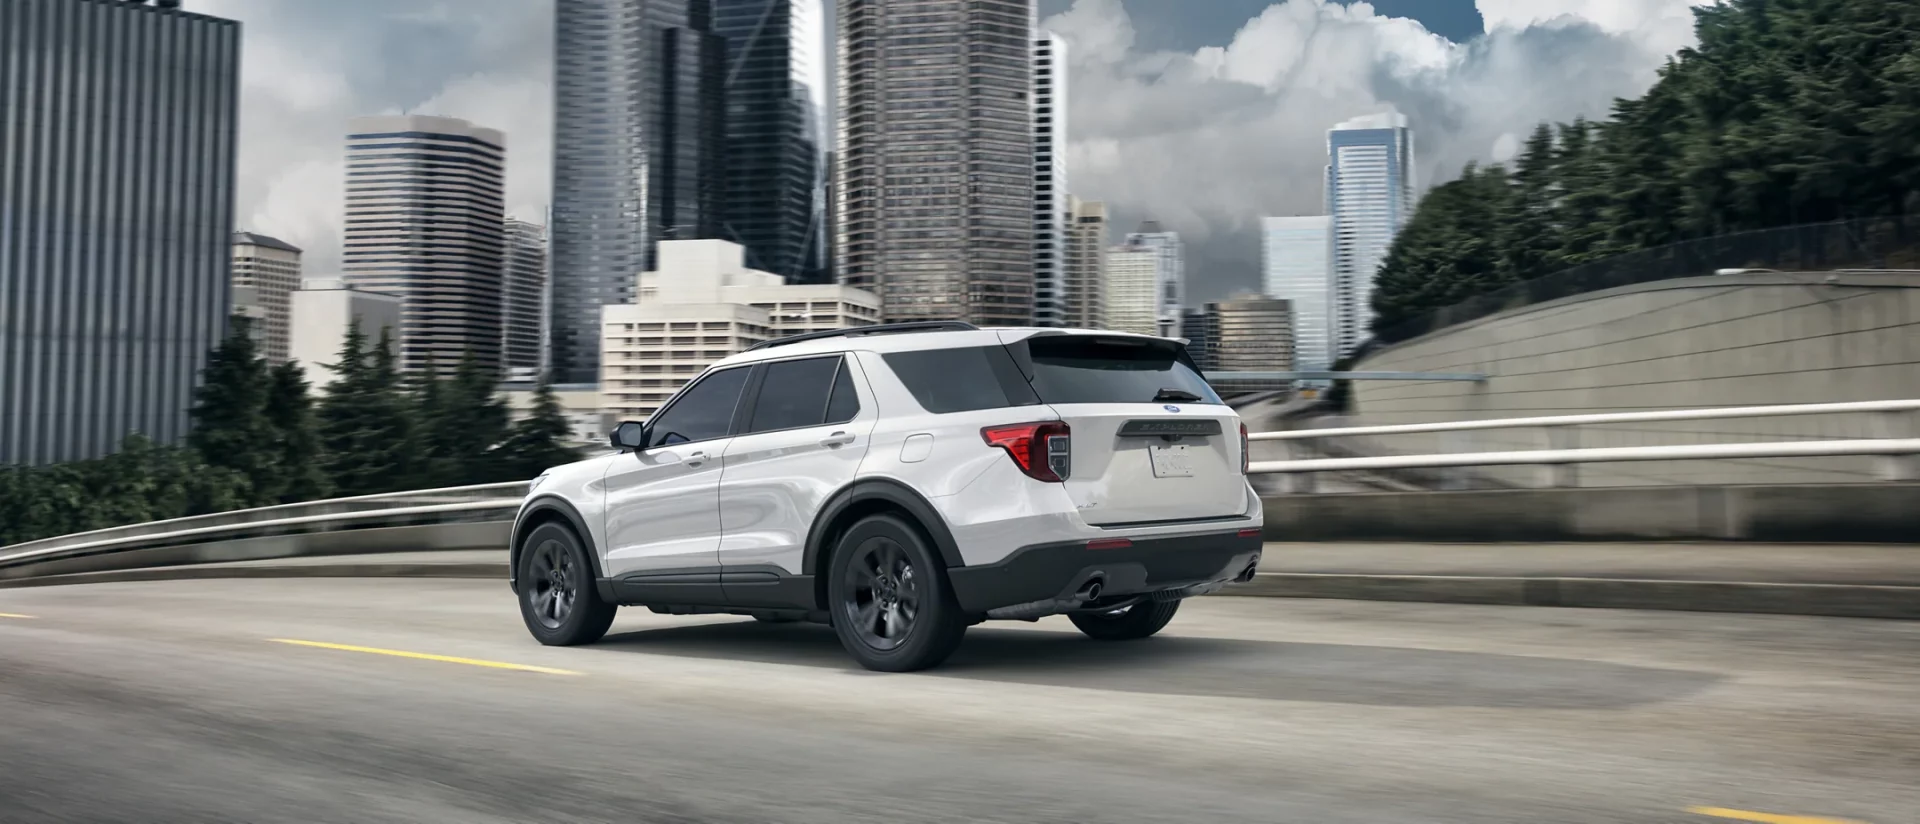 white 2021 ford explorer driving in the city